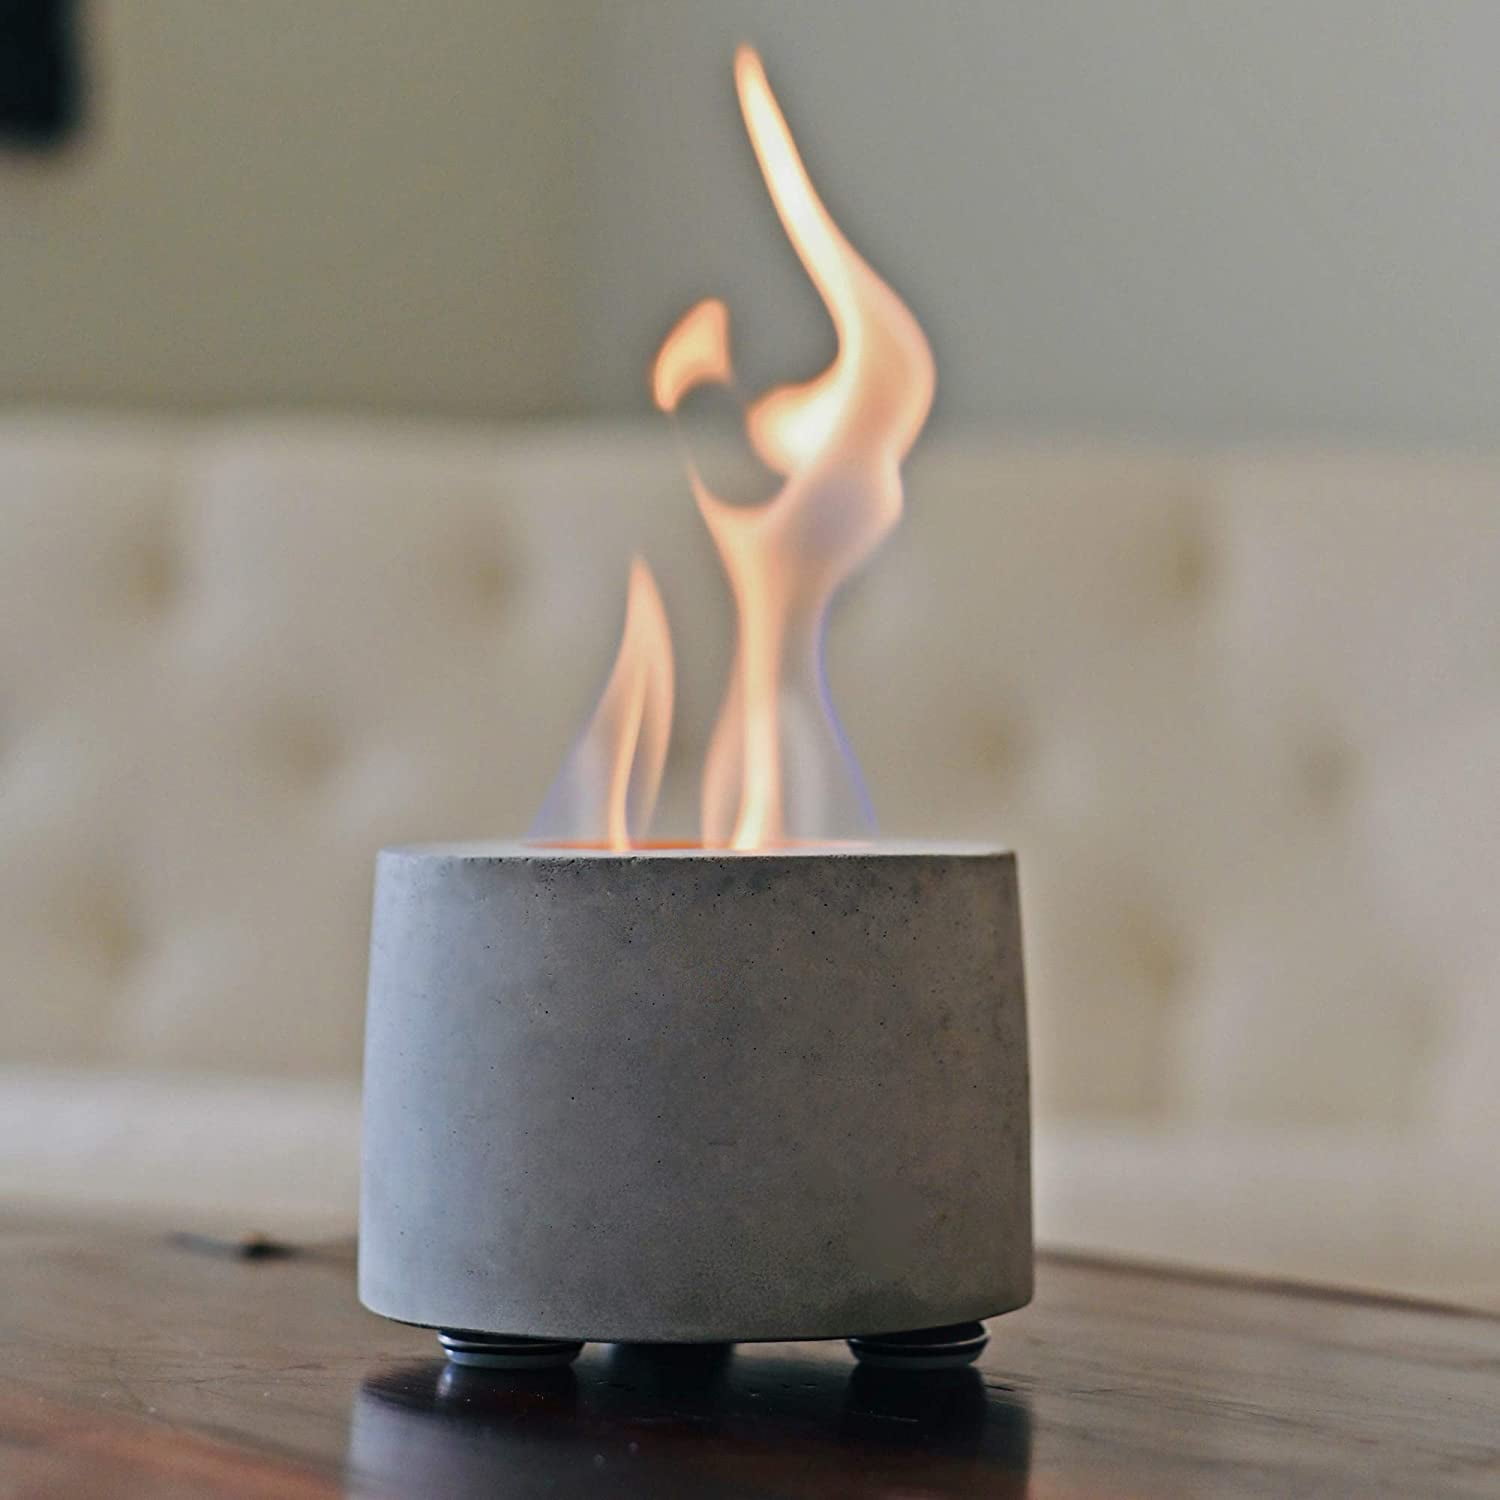 Colsen Tabletop Rubbing, Is A Propane Fire Pit Safe Indoors